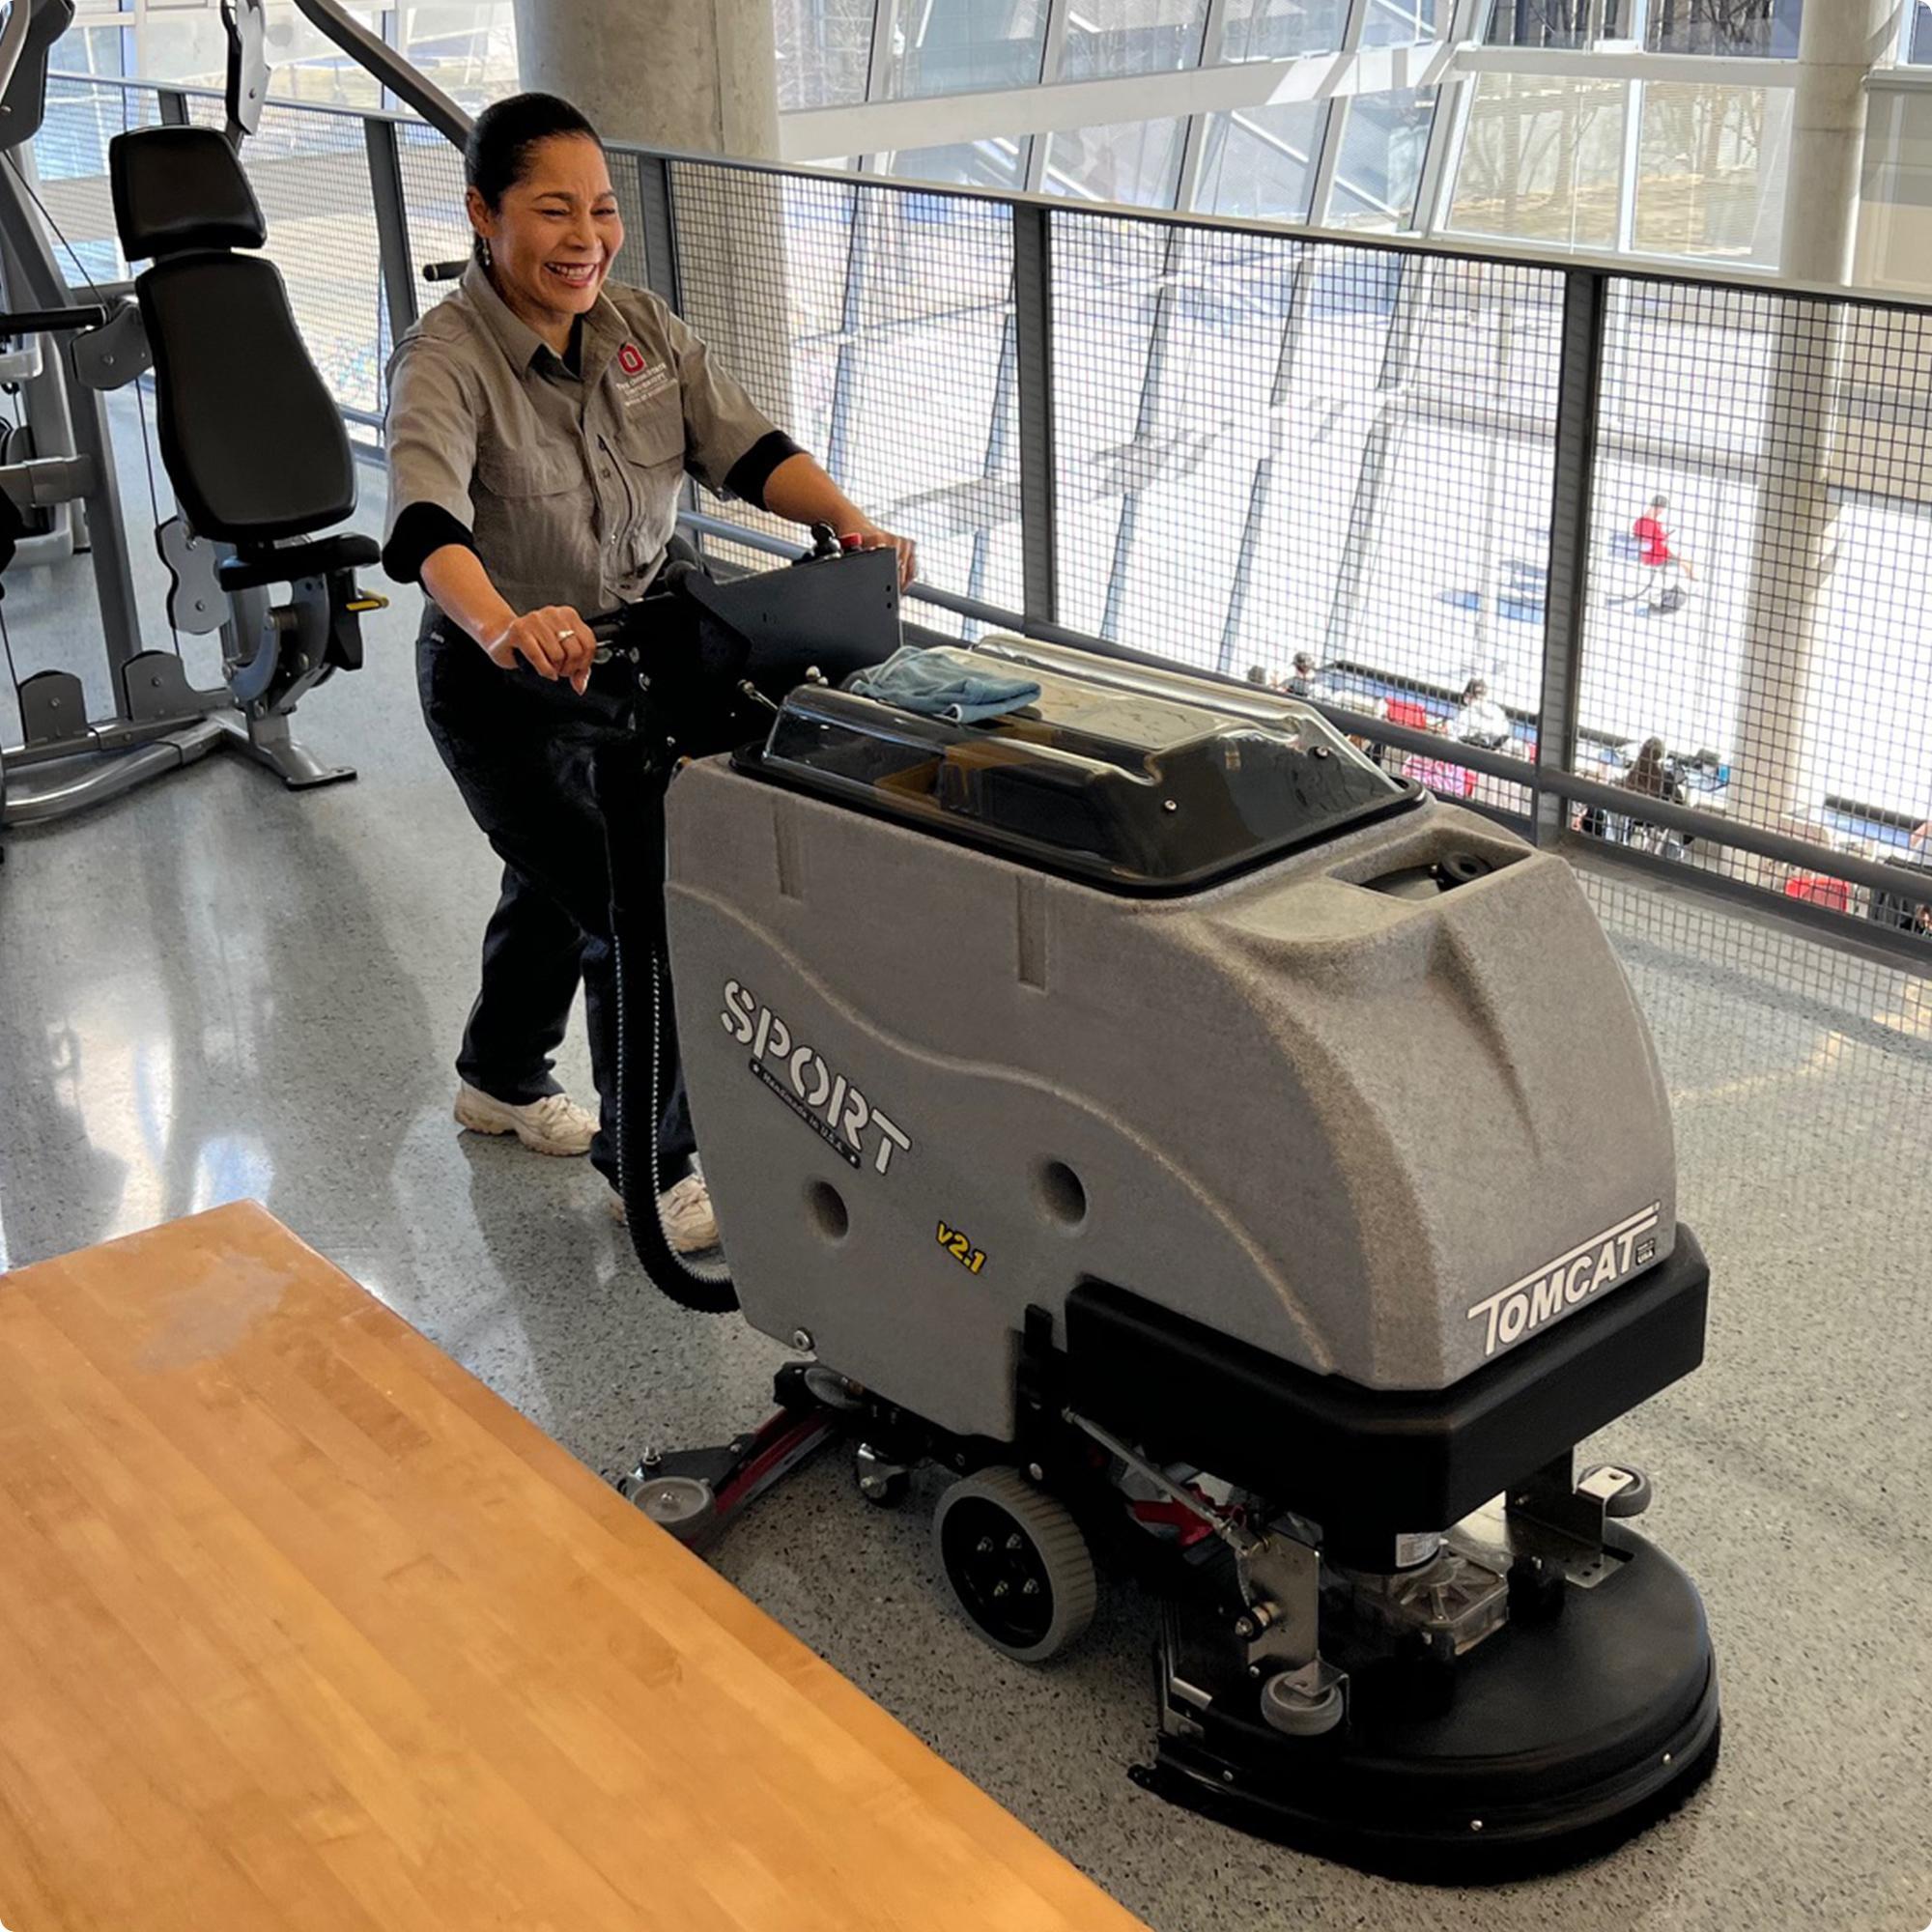 Tomcat SPORT v2.1 20" Disk Deck Floor Scrubber cleaning a terazzo floor in the fitness center of a university IMG00064